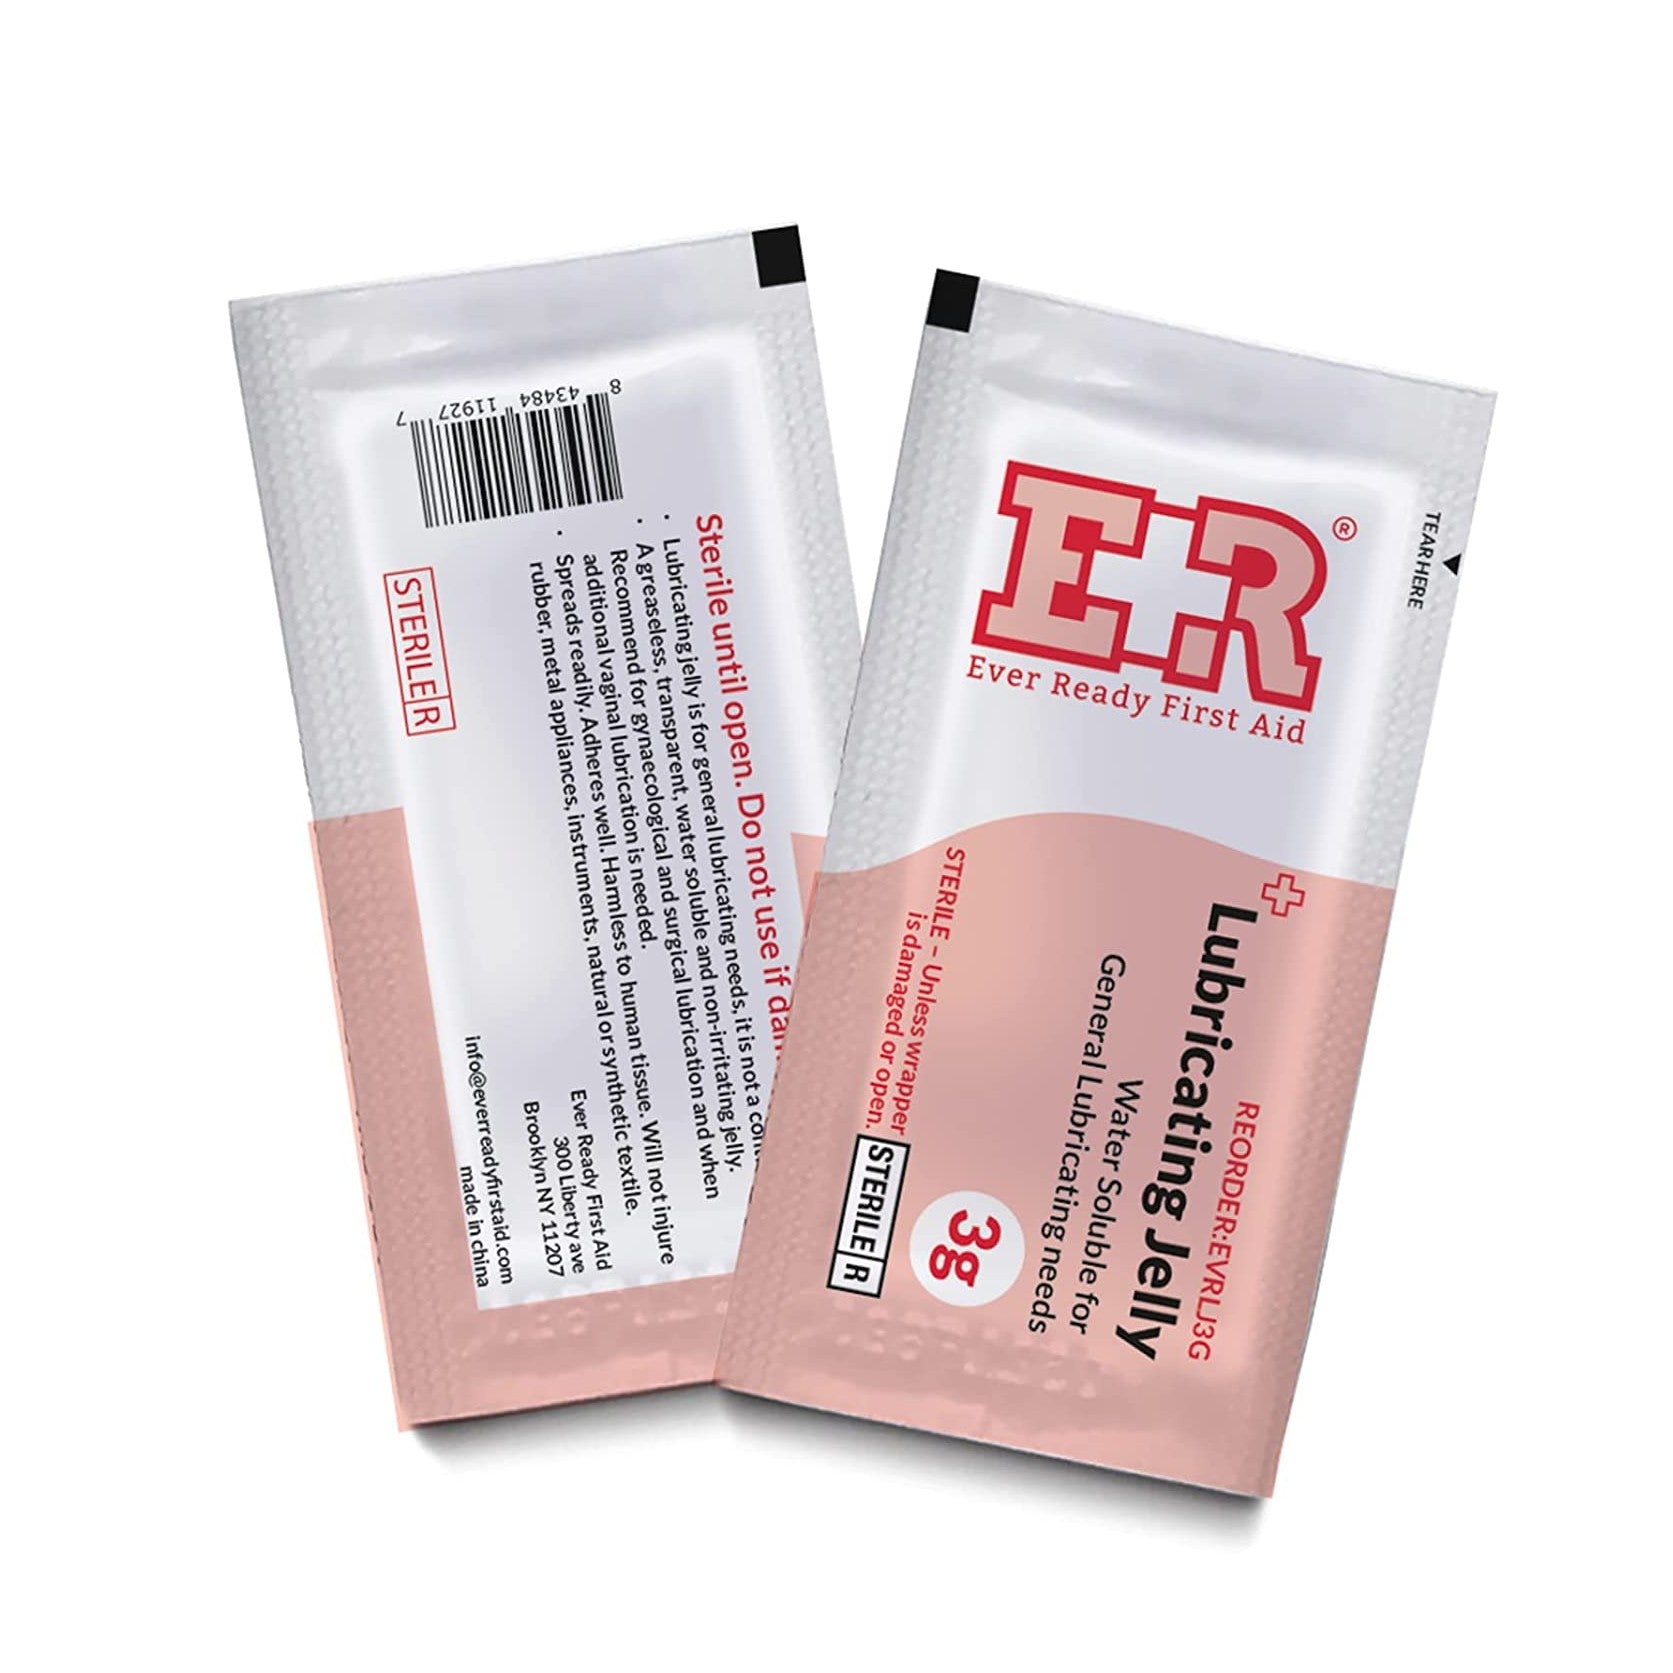 Ever Ready First Aid Lubricating Jelly - Box of 144 Packets